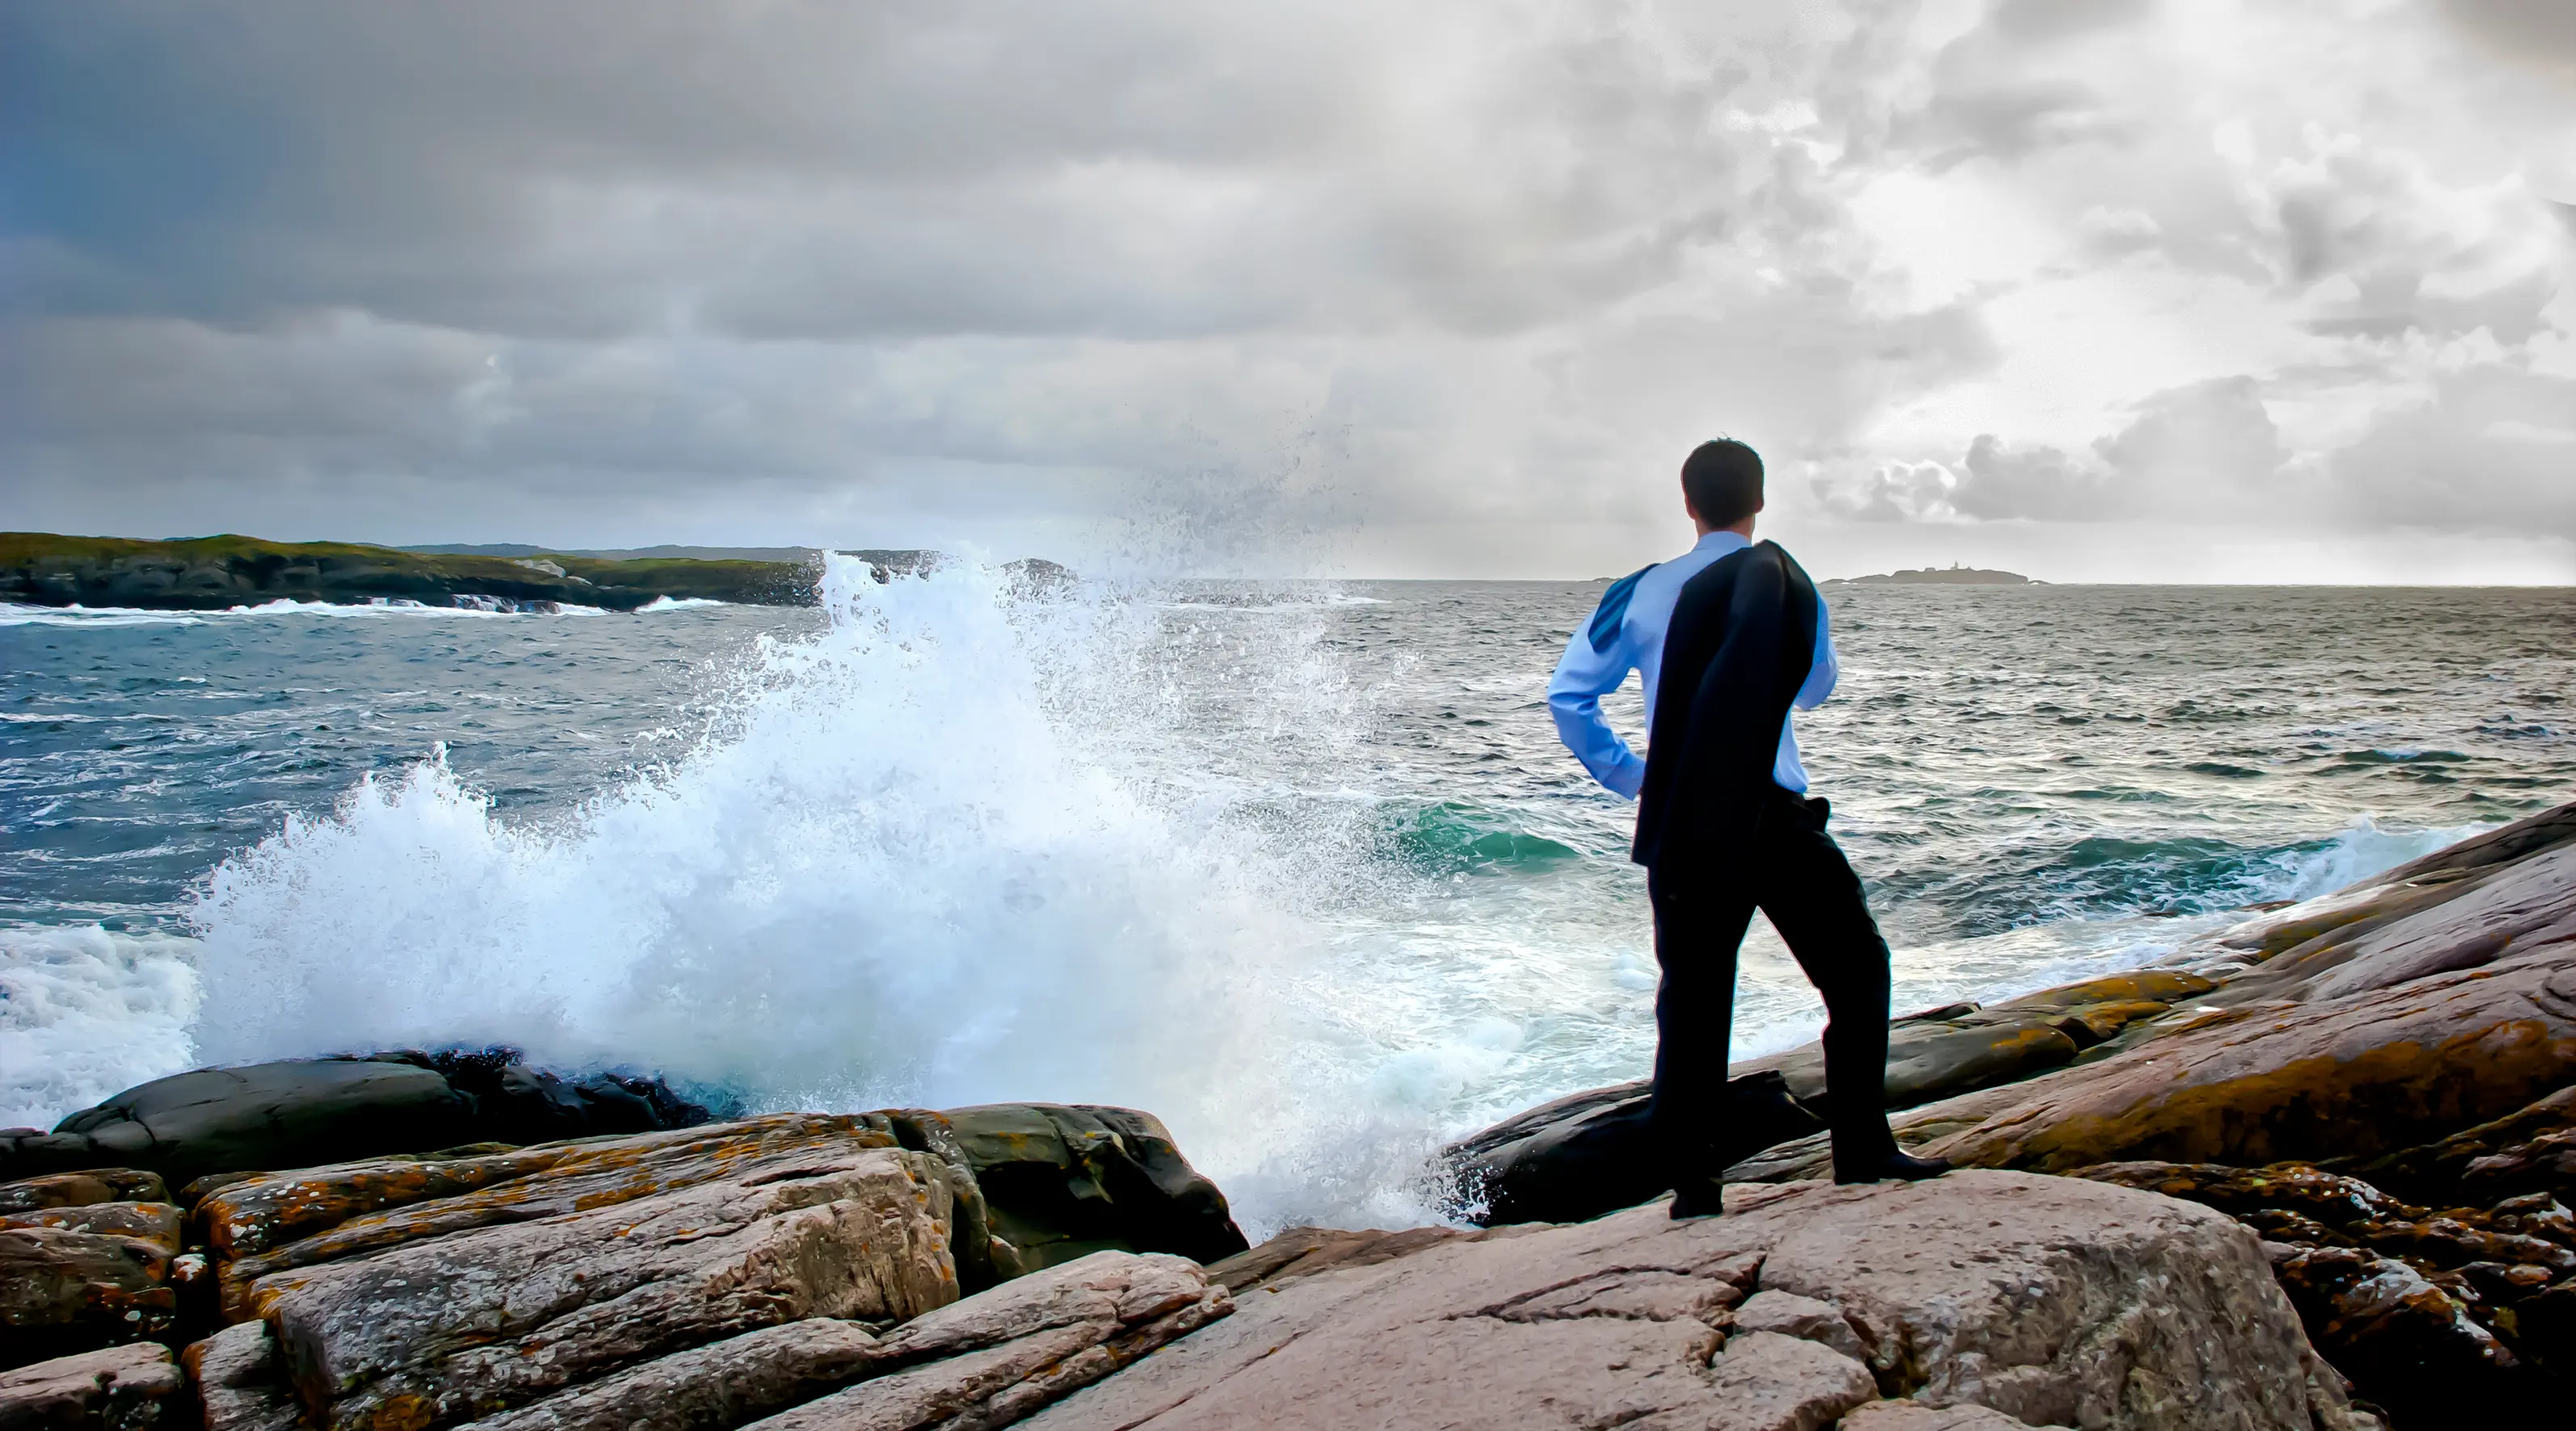 A guy in a suit facing the brutal waves of the ocean from the shore